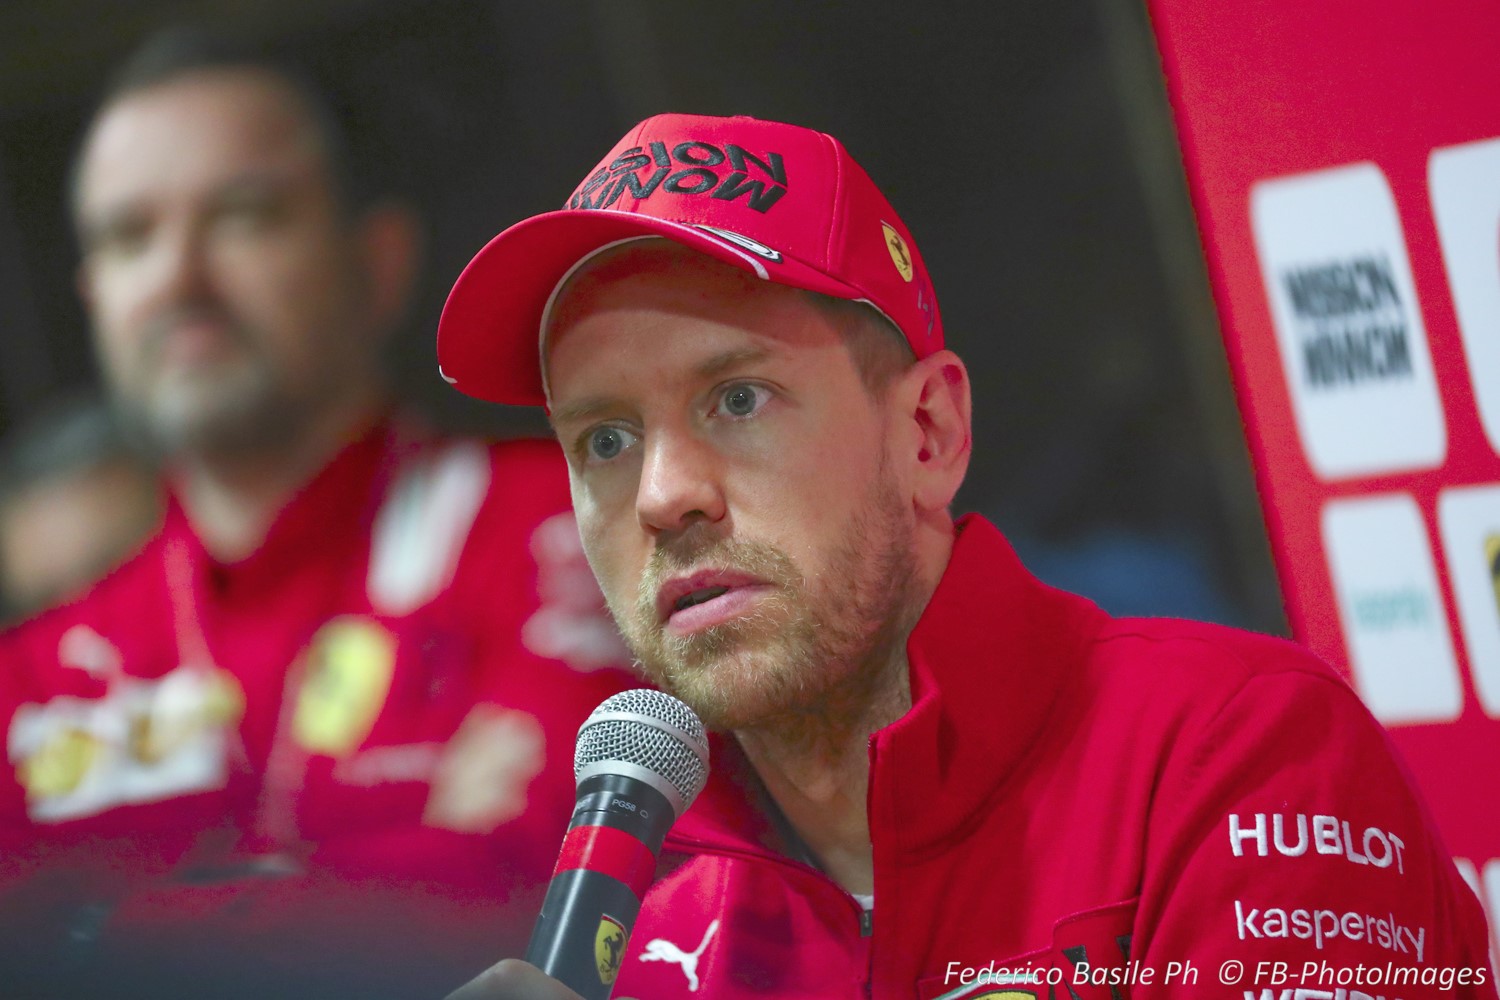 Vettel might decide to distance himself from the cheating scandal